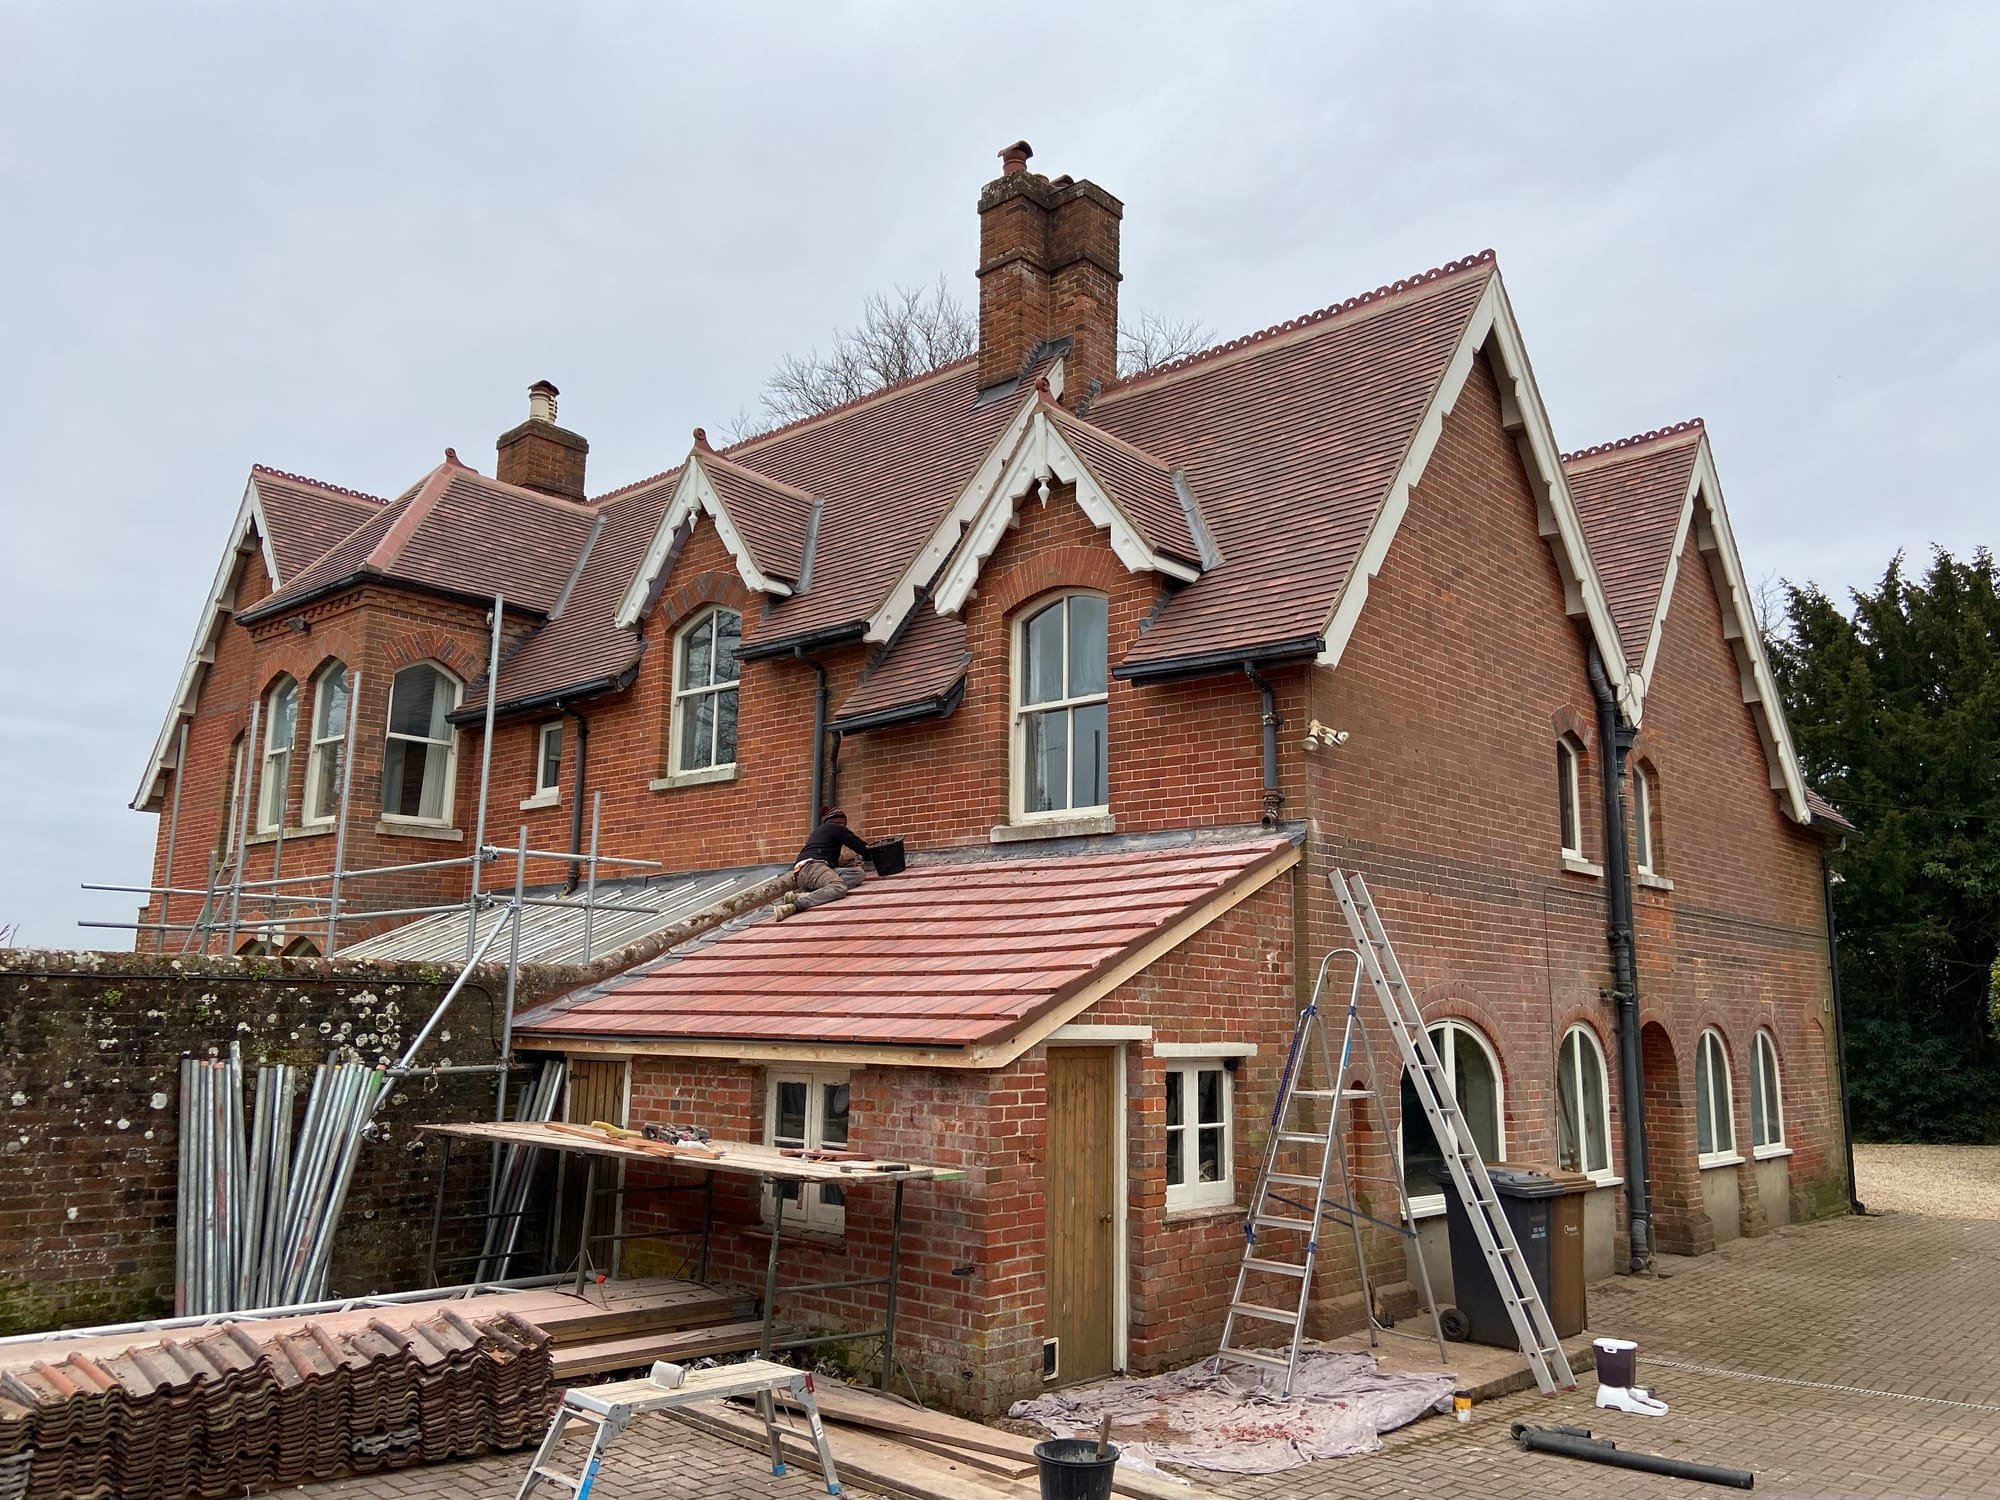 new lean-to-roof with marley modern old english interlocking tiles